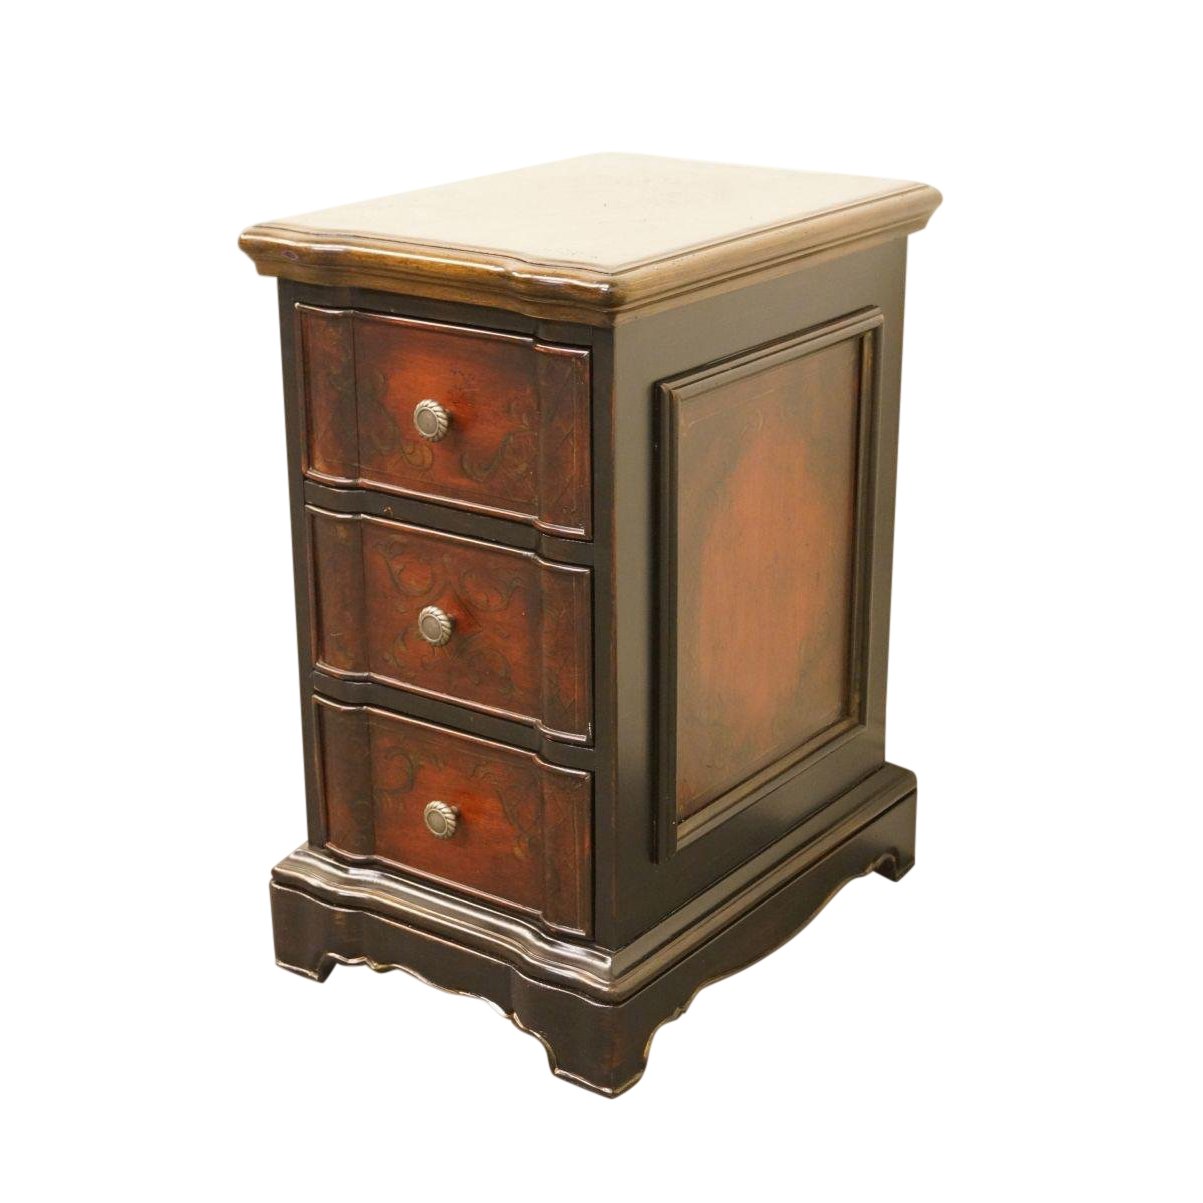 hooker furniture seven seas collection three drawer chairside chest accent table with drawers chairish bath and beyond salt lamp white counter height dining set seat for drums